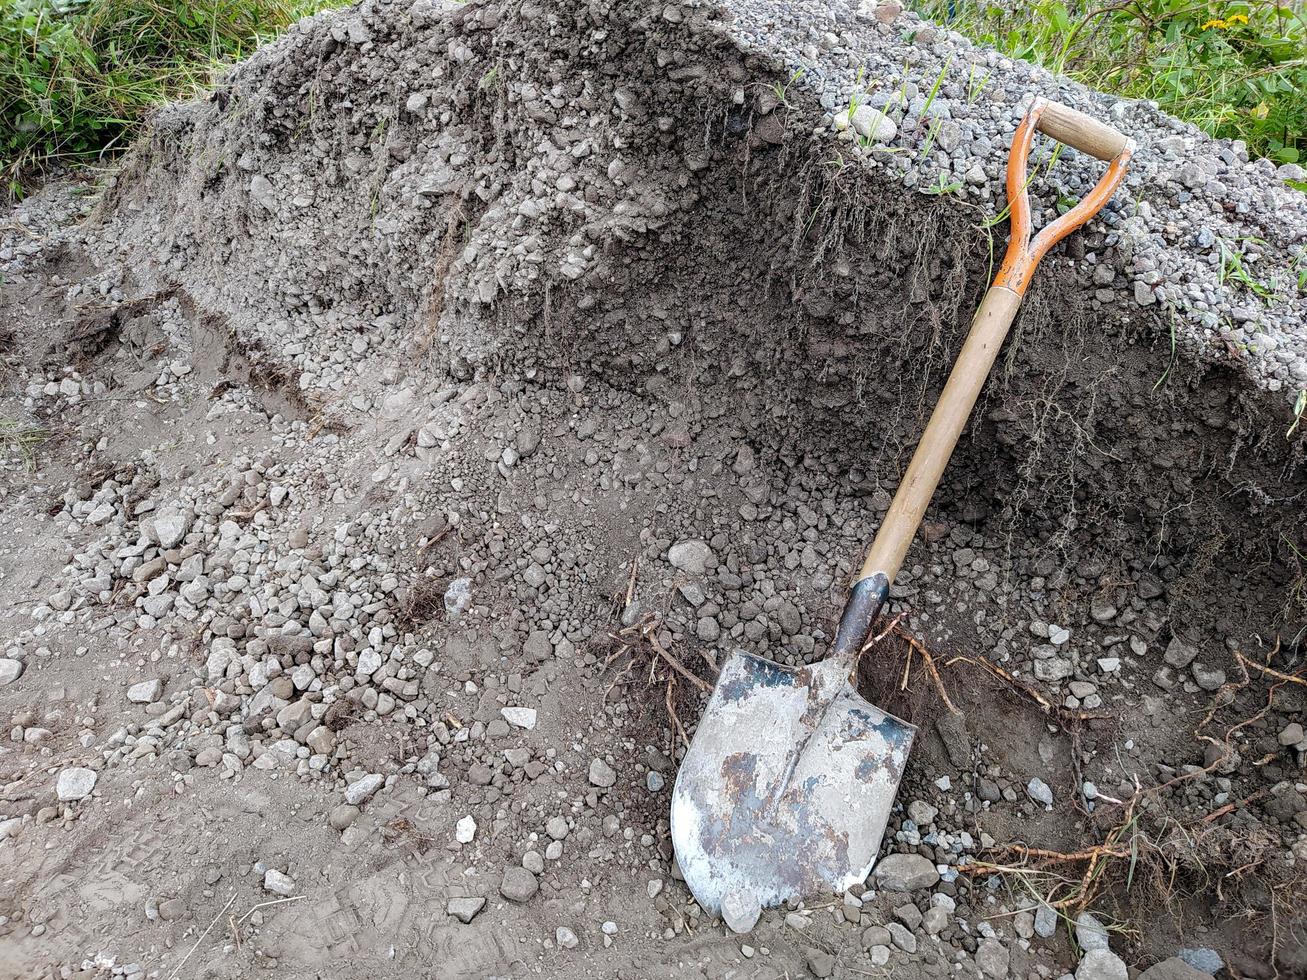 A spade and gravel photo